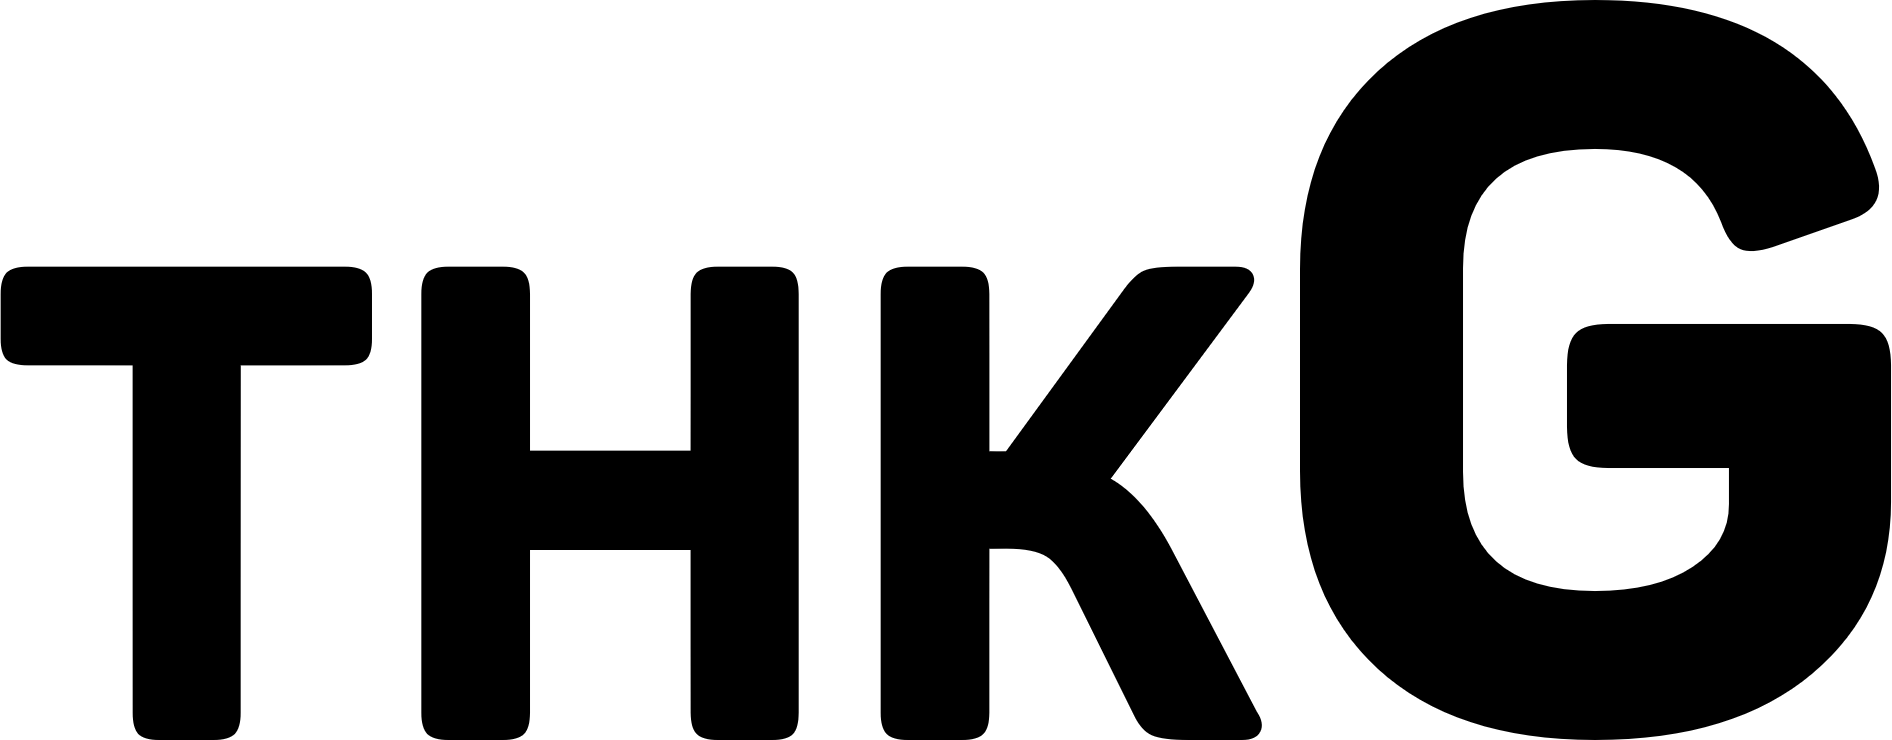 THK Logo - THK General | Mihsign Vision | FANDOM powered by Wikia